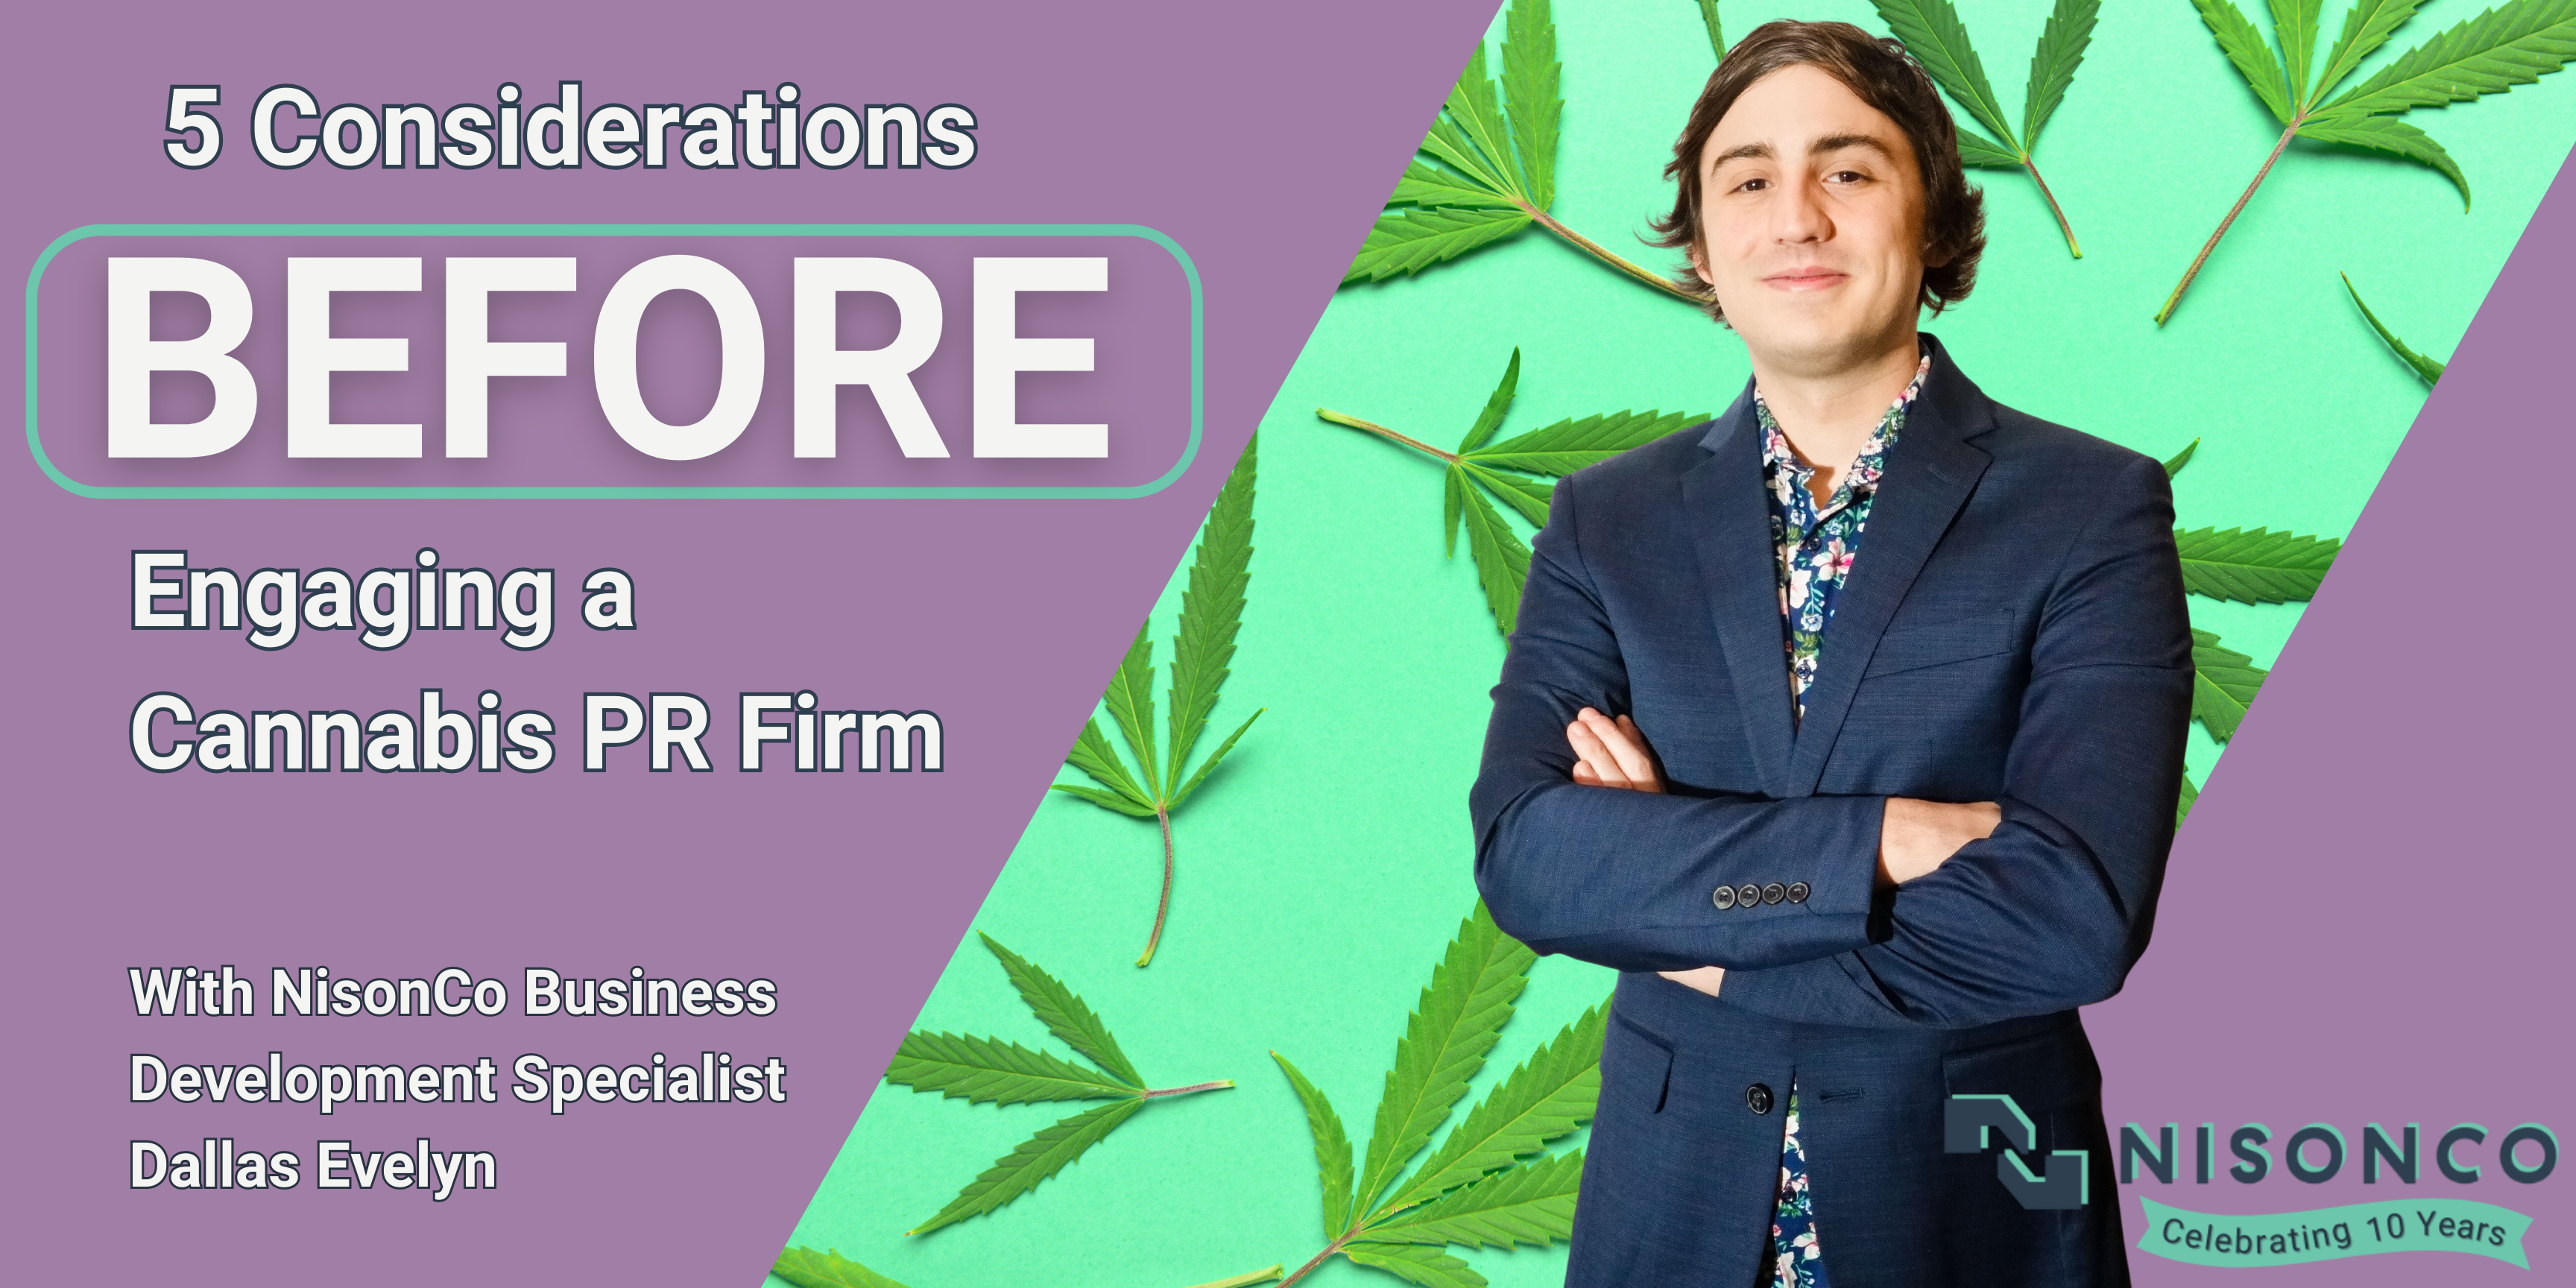 The text, '5 Considerations Before Engaging a Cannabis PR Firm' appears to the left of Dallas Evelyn, NisonCo Business Development Specialist, who is superimposed on cannabis leaves.